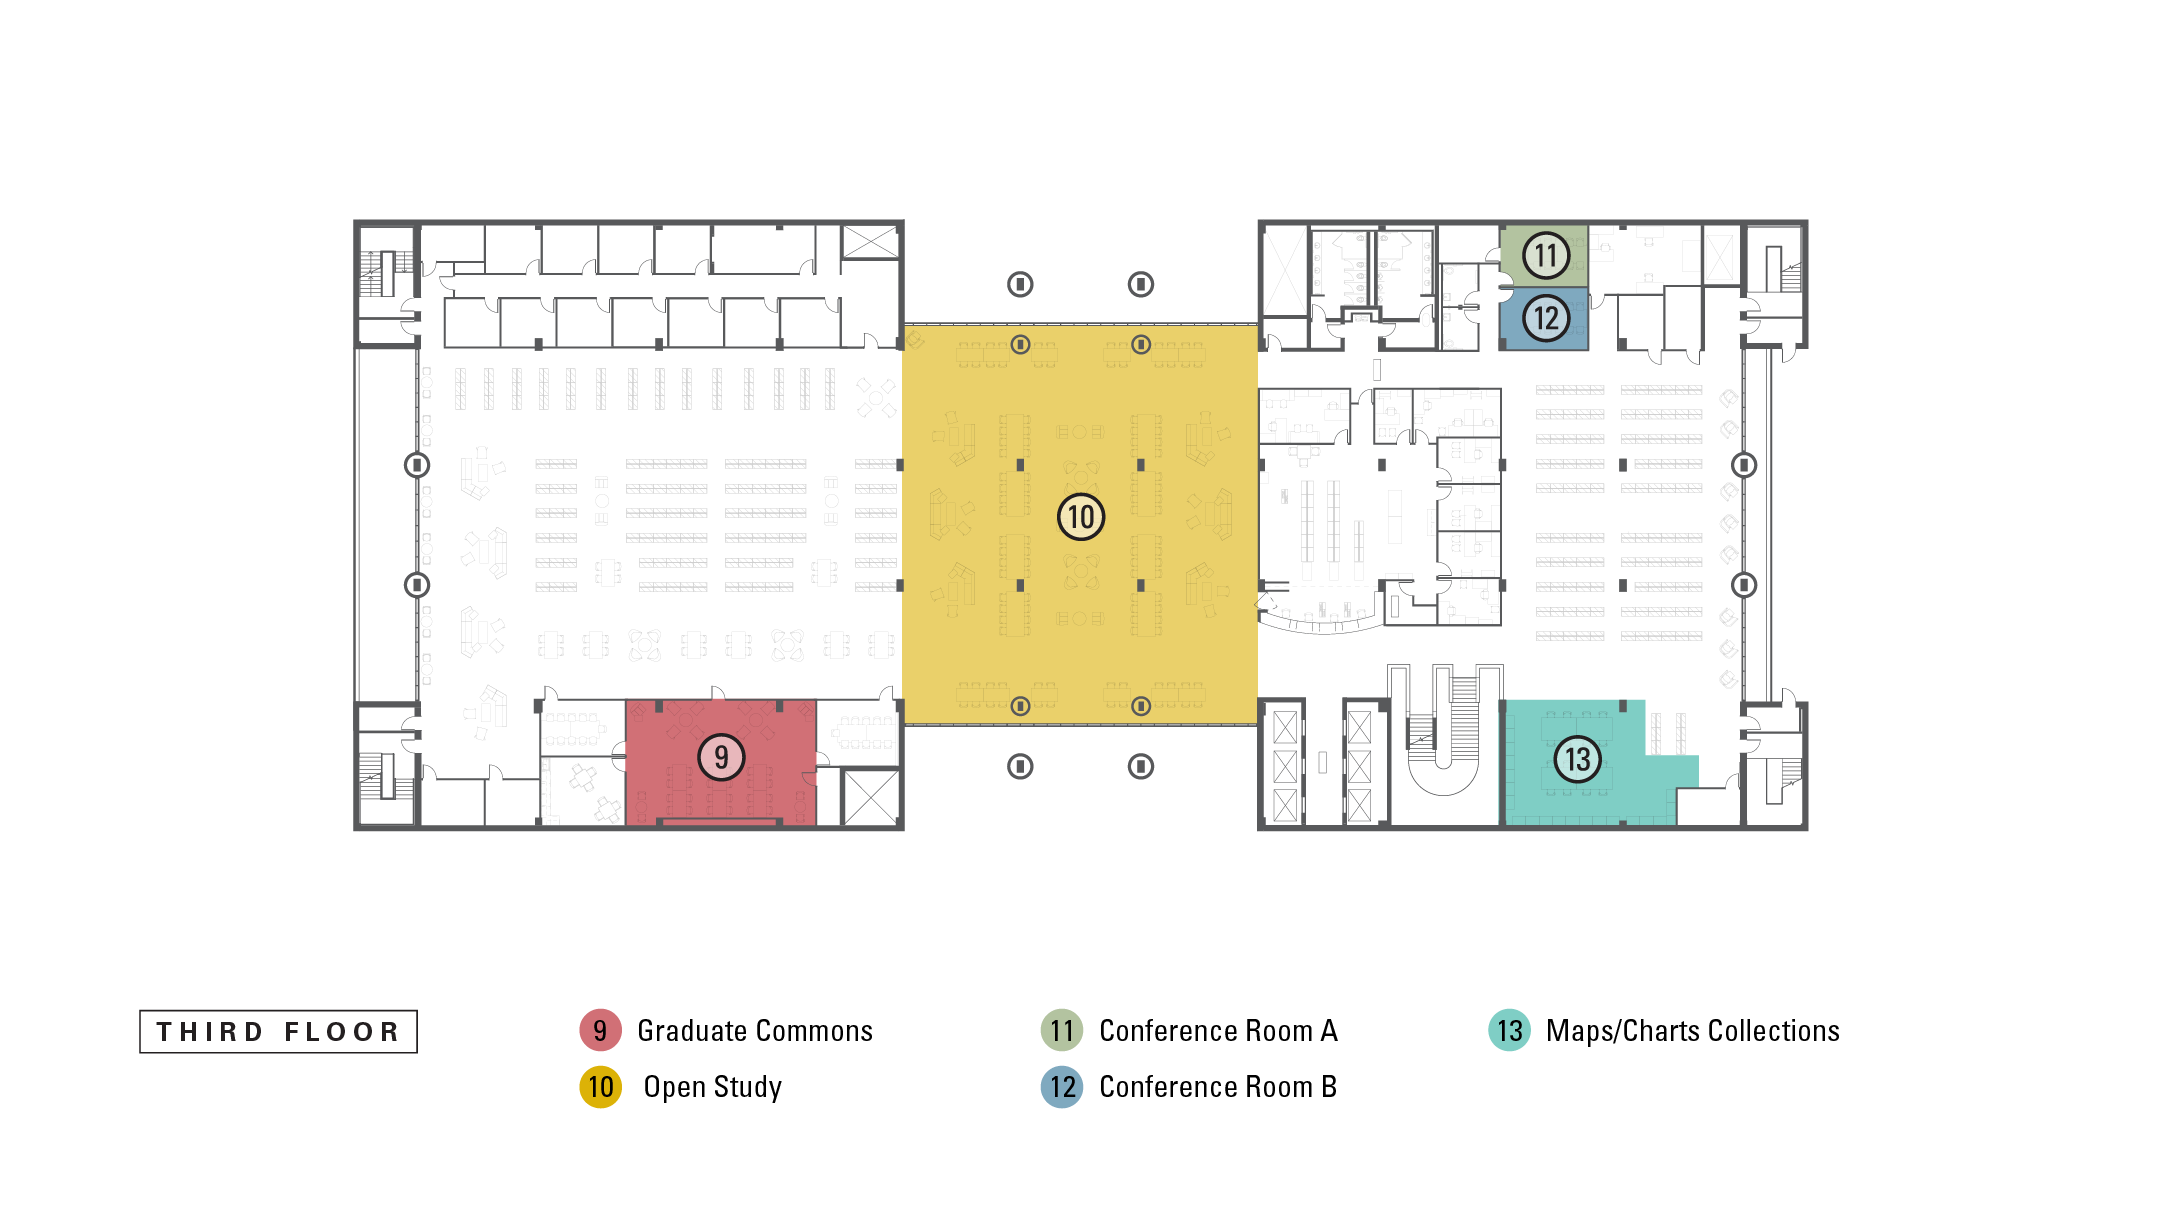 Floorplan of 3rd floor with highlighted spaces that correspond to numbered descriptions